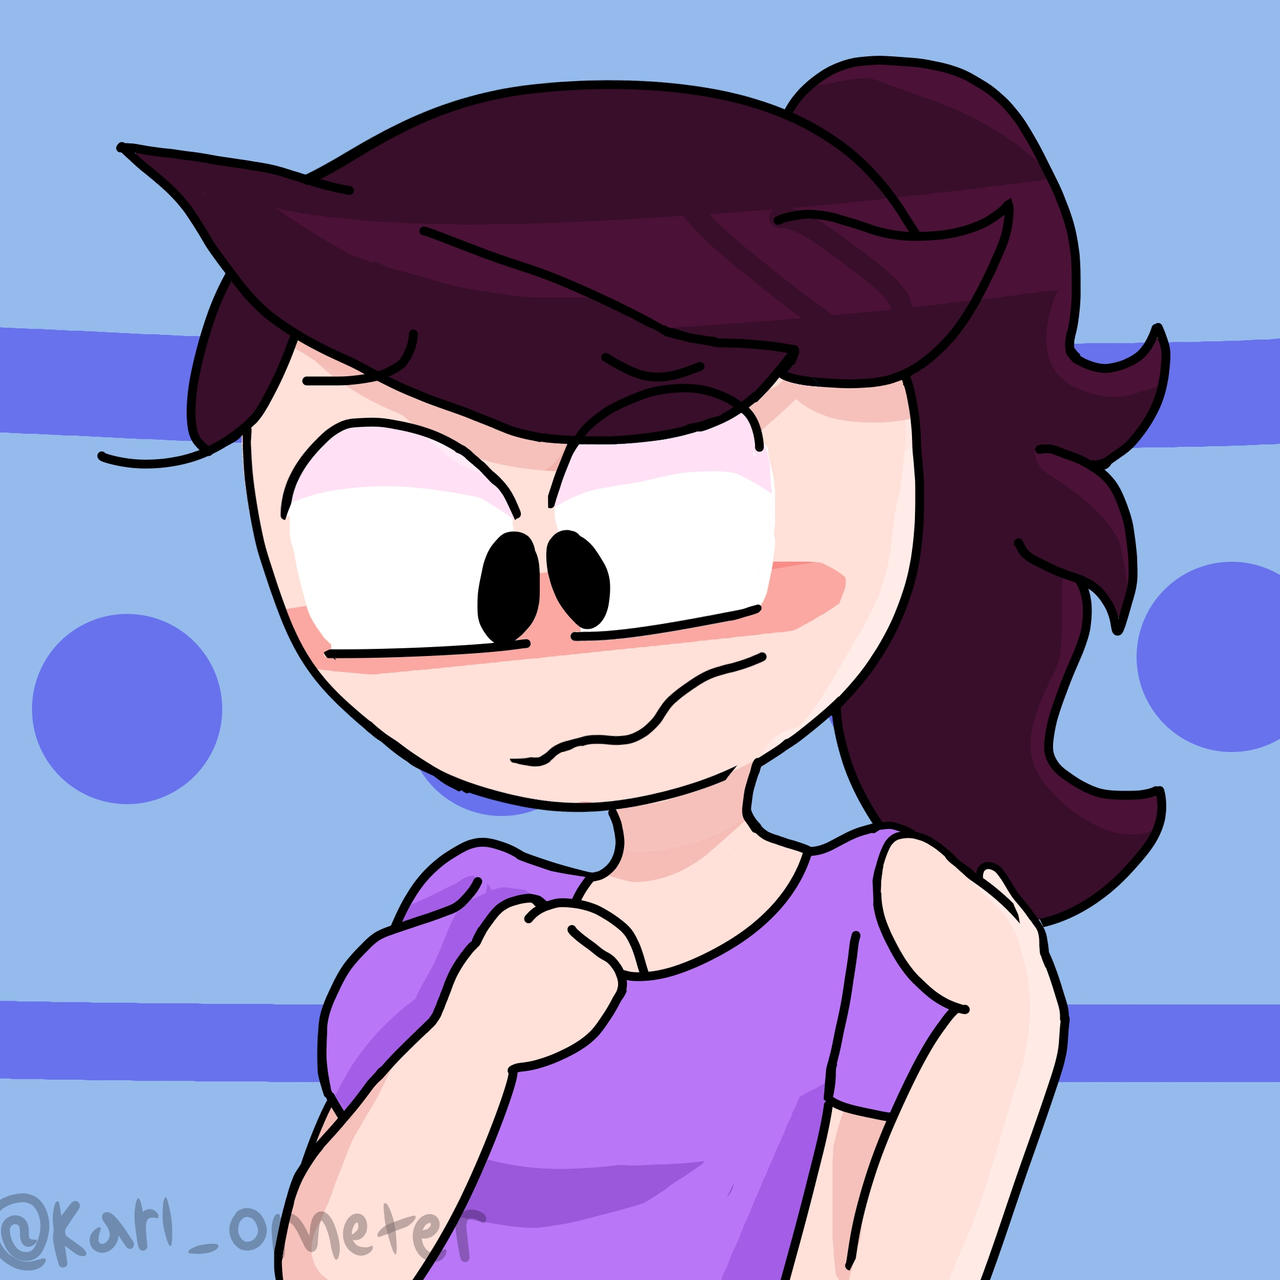 Pin by Ssmimo on Animation cool  Jaiden animations, Animation, Fan art